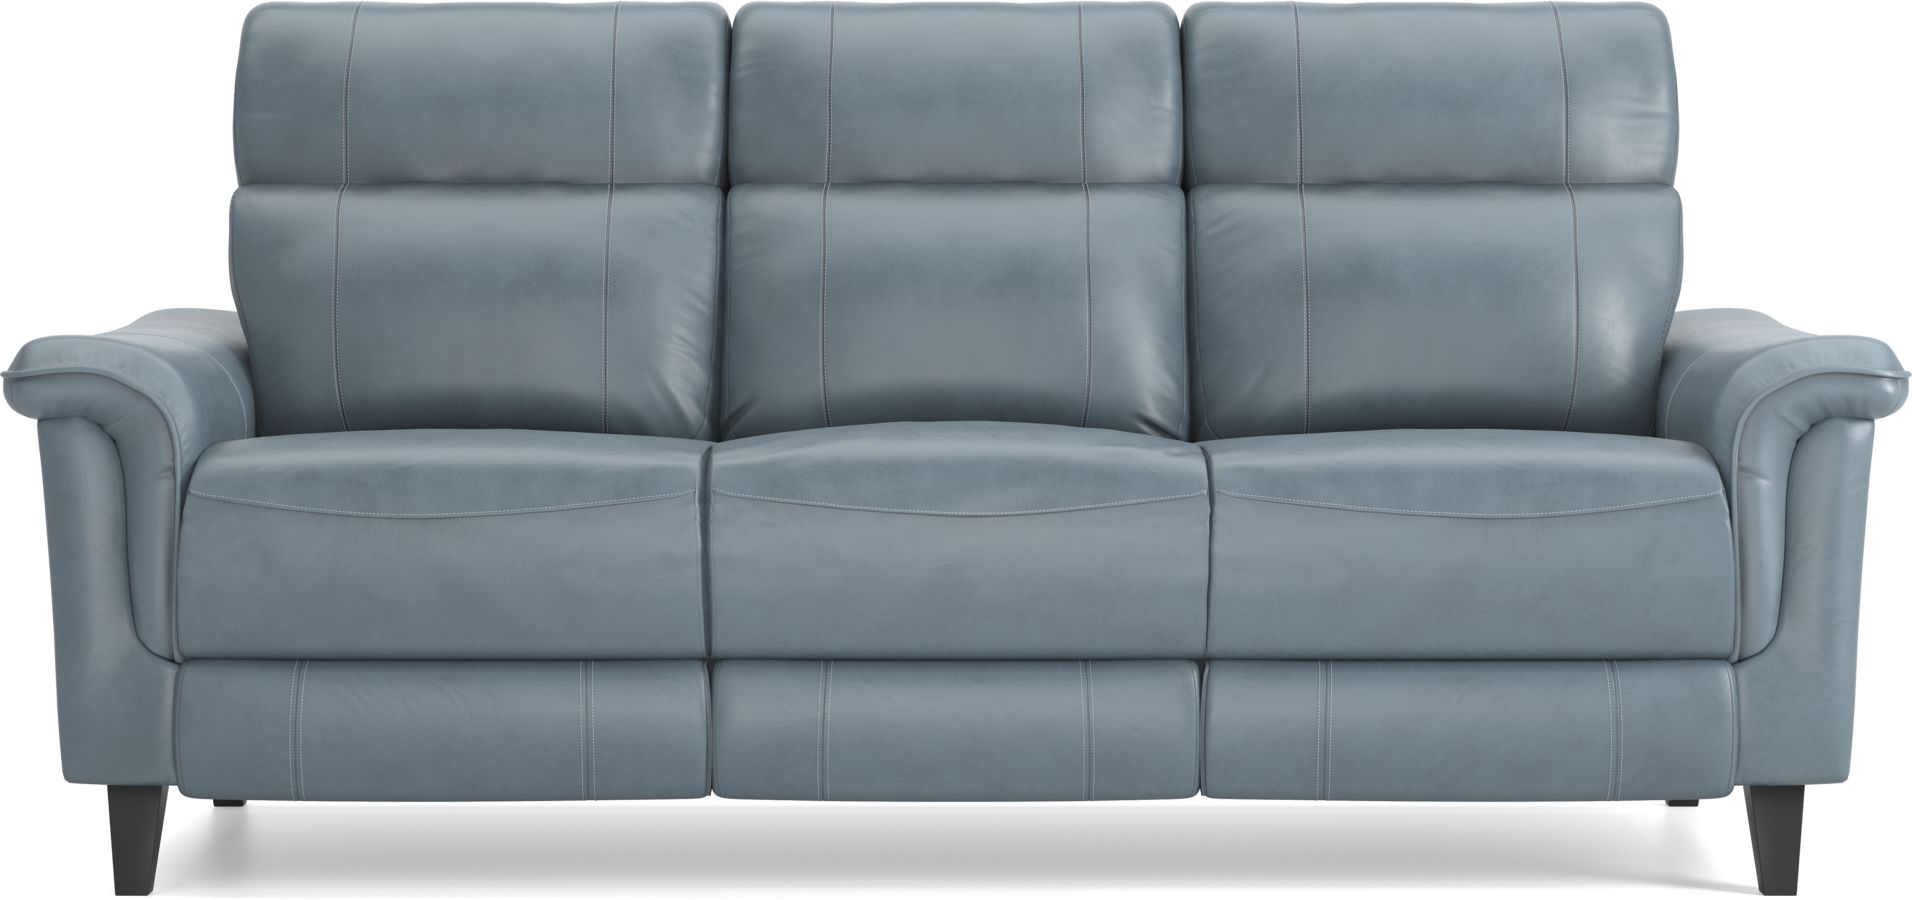 Download Real Leather Couches For Sale Pics